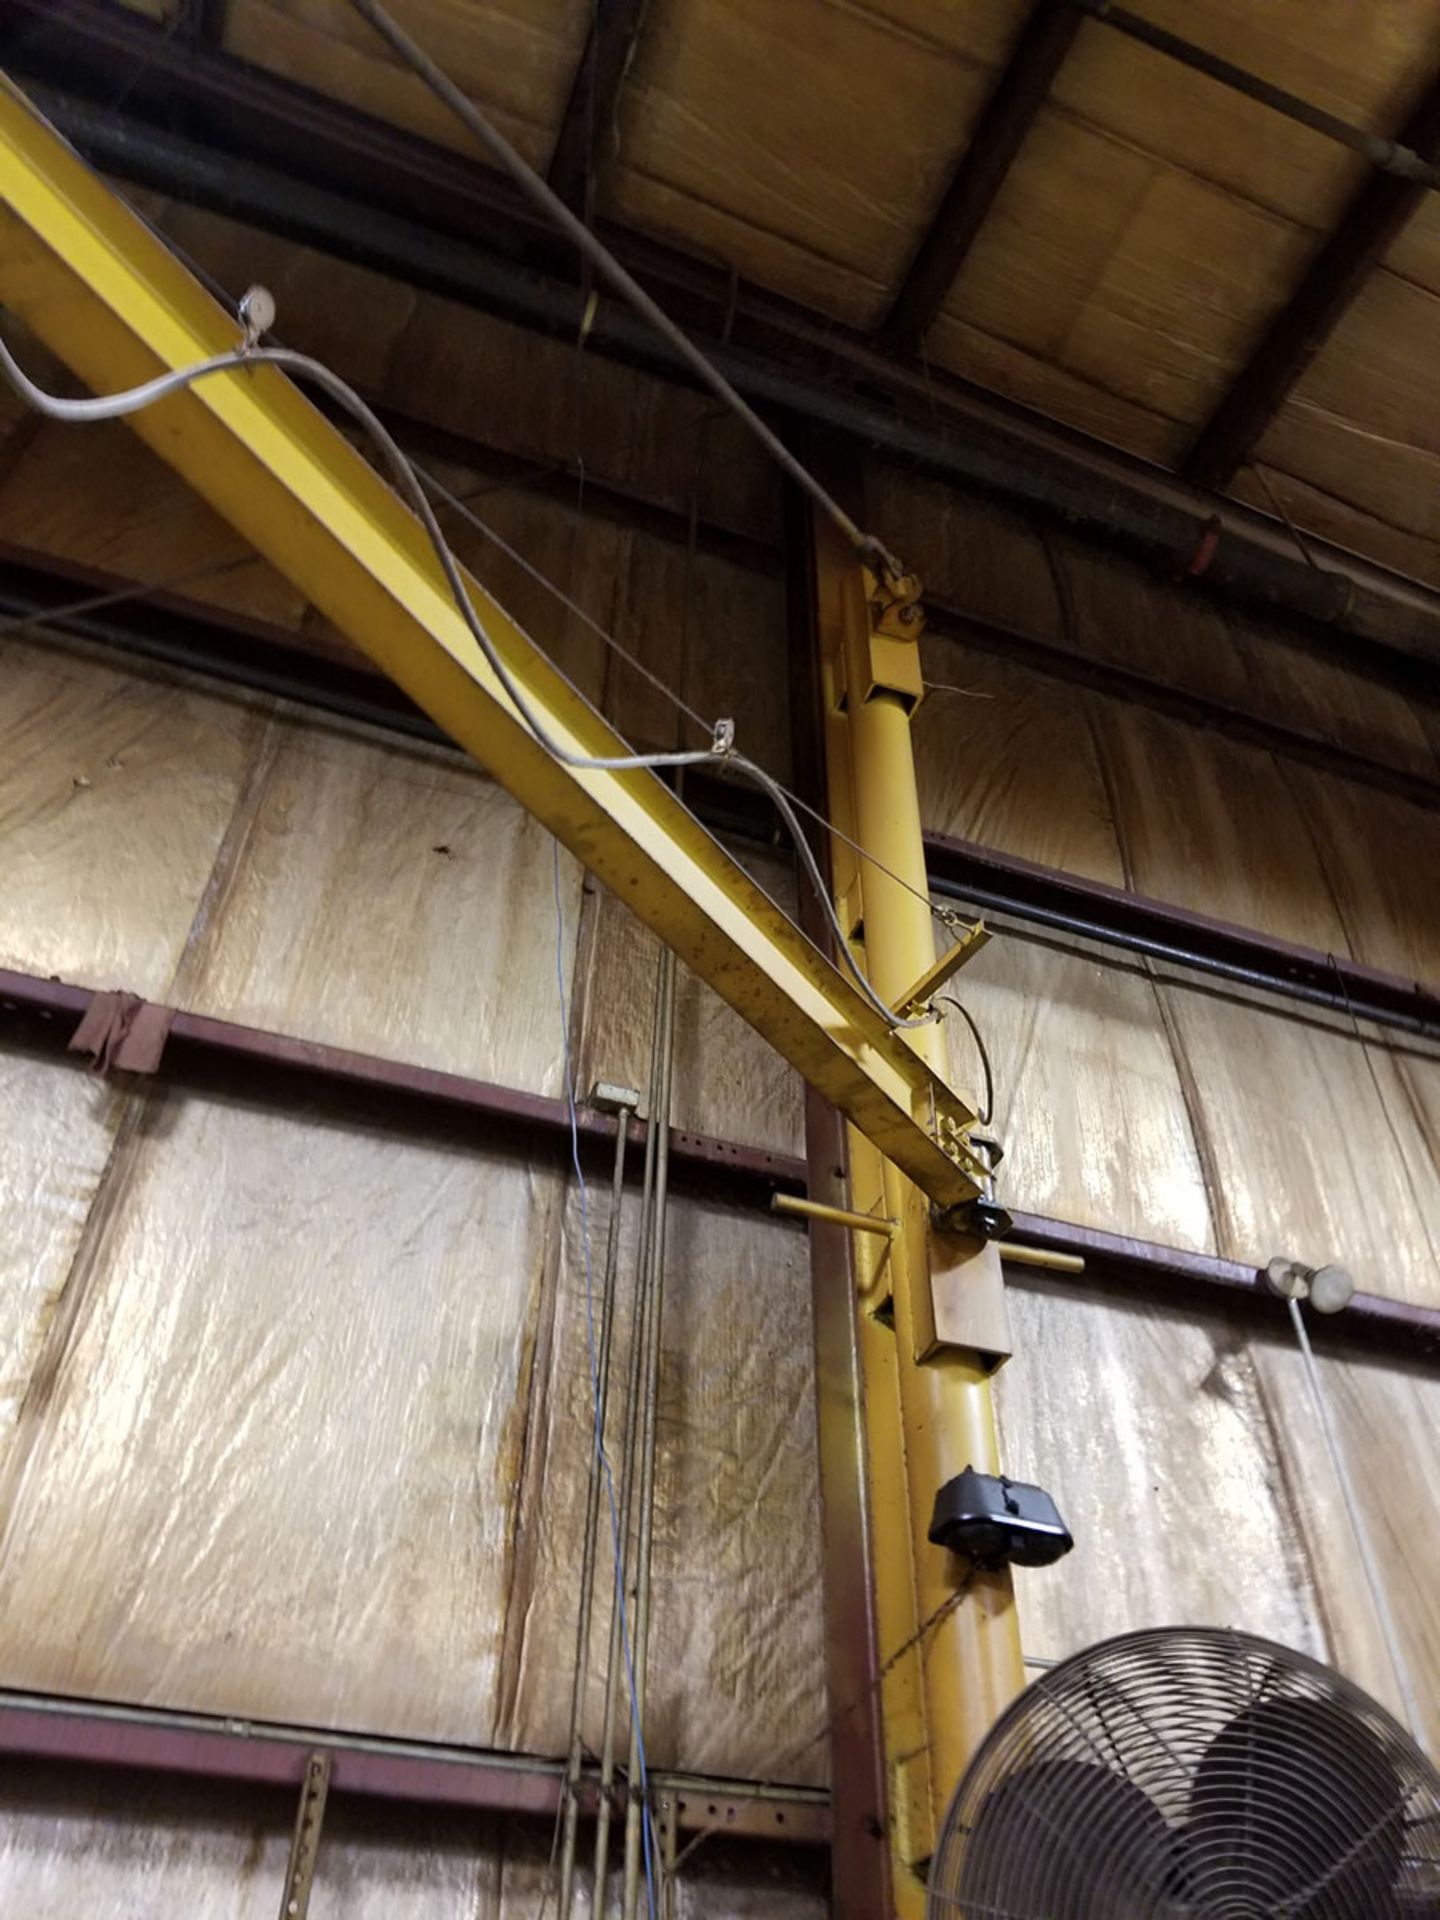 1/2 TON COLUMN MOUNTED JIB CRANE WITH COFFING 1/2 TON ELECTRIC CABLE HOIST WITH PENDANT CONTROL - Image 5 of 7